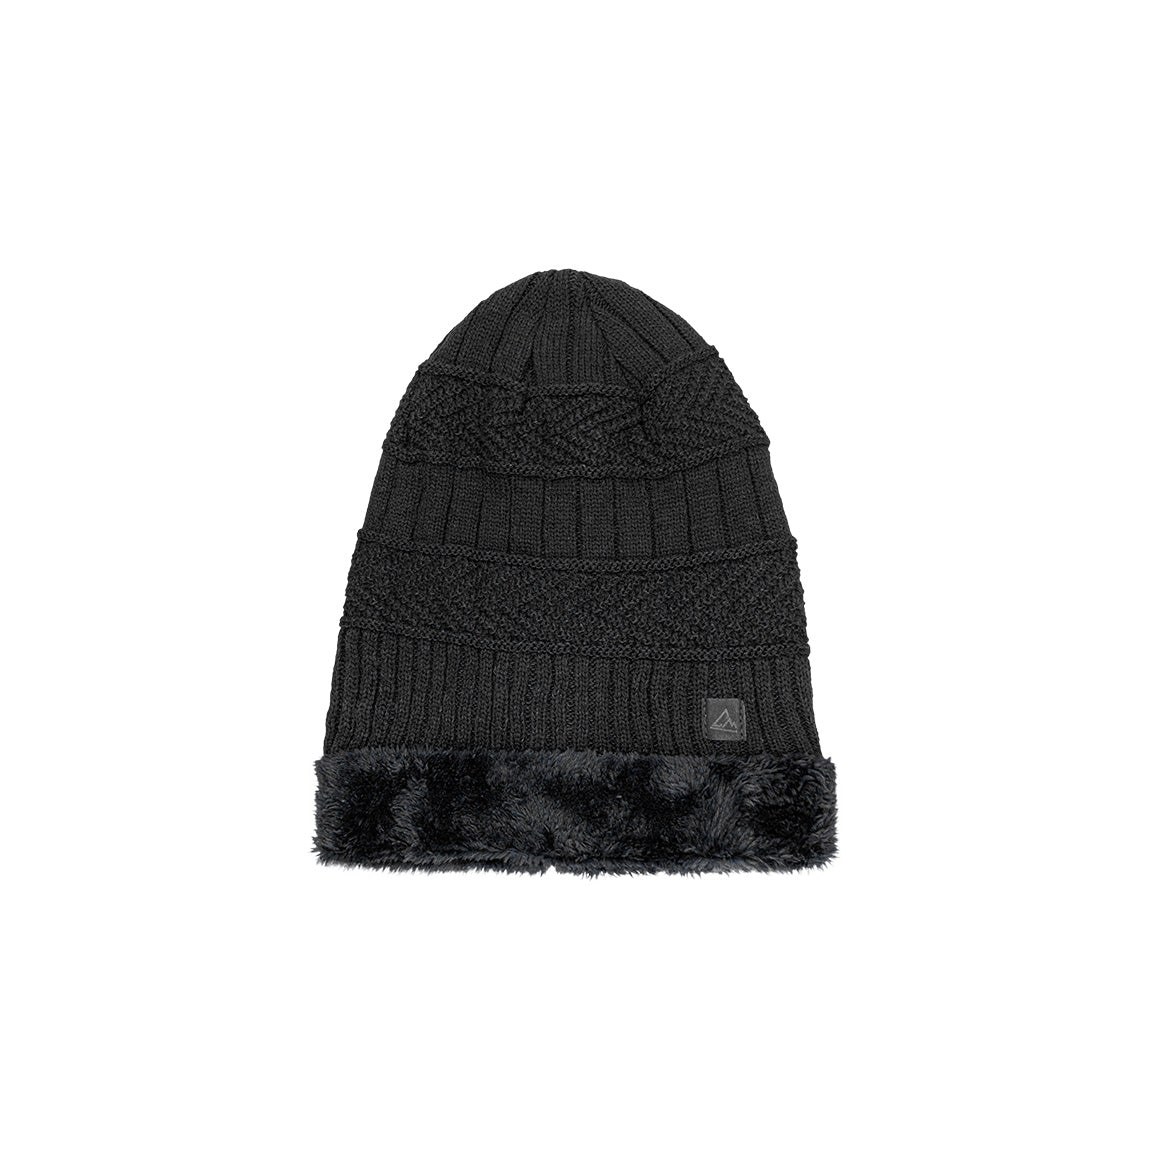 A black heavy knit beanie with a cable knit pattern, a ribbed fold-over cuff, and a fluffy black faux fur band above the cuff. It has a small triangular logo patch on the cuff.